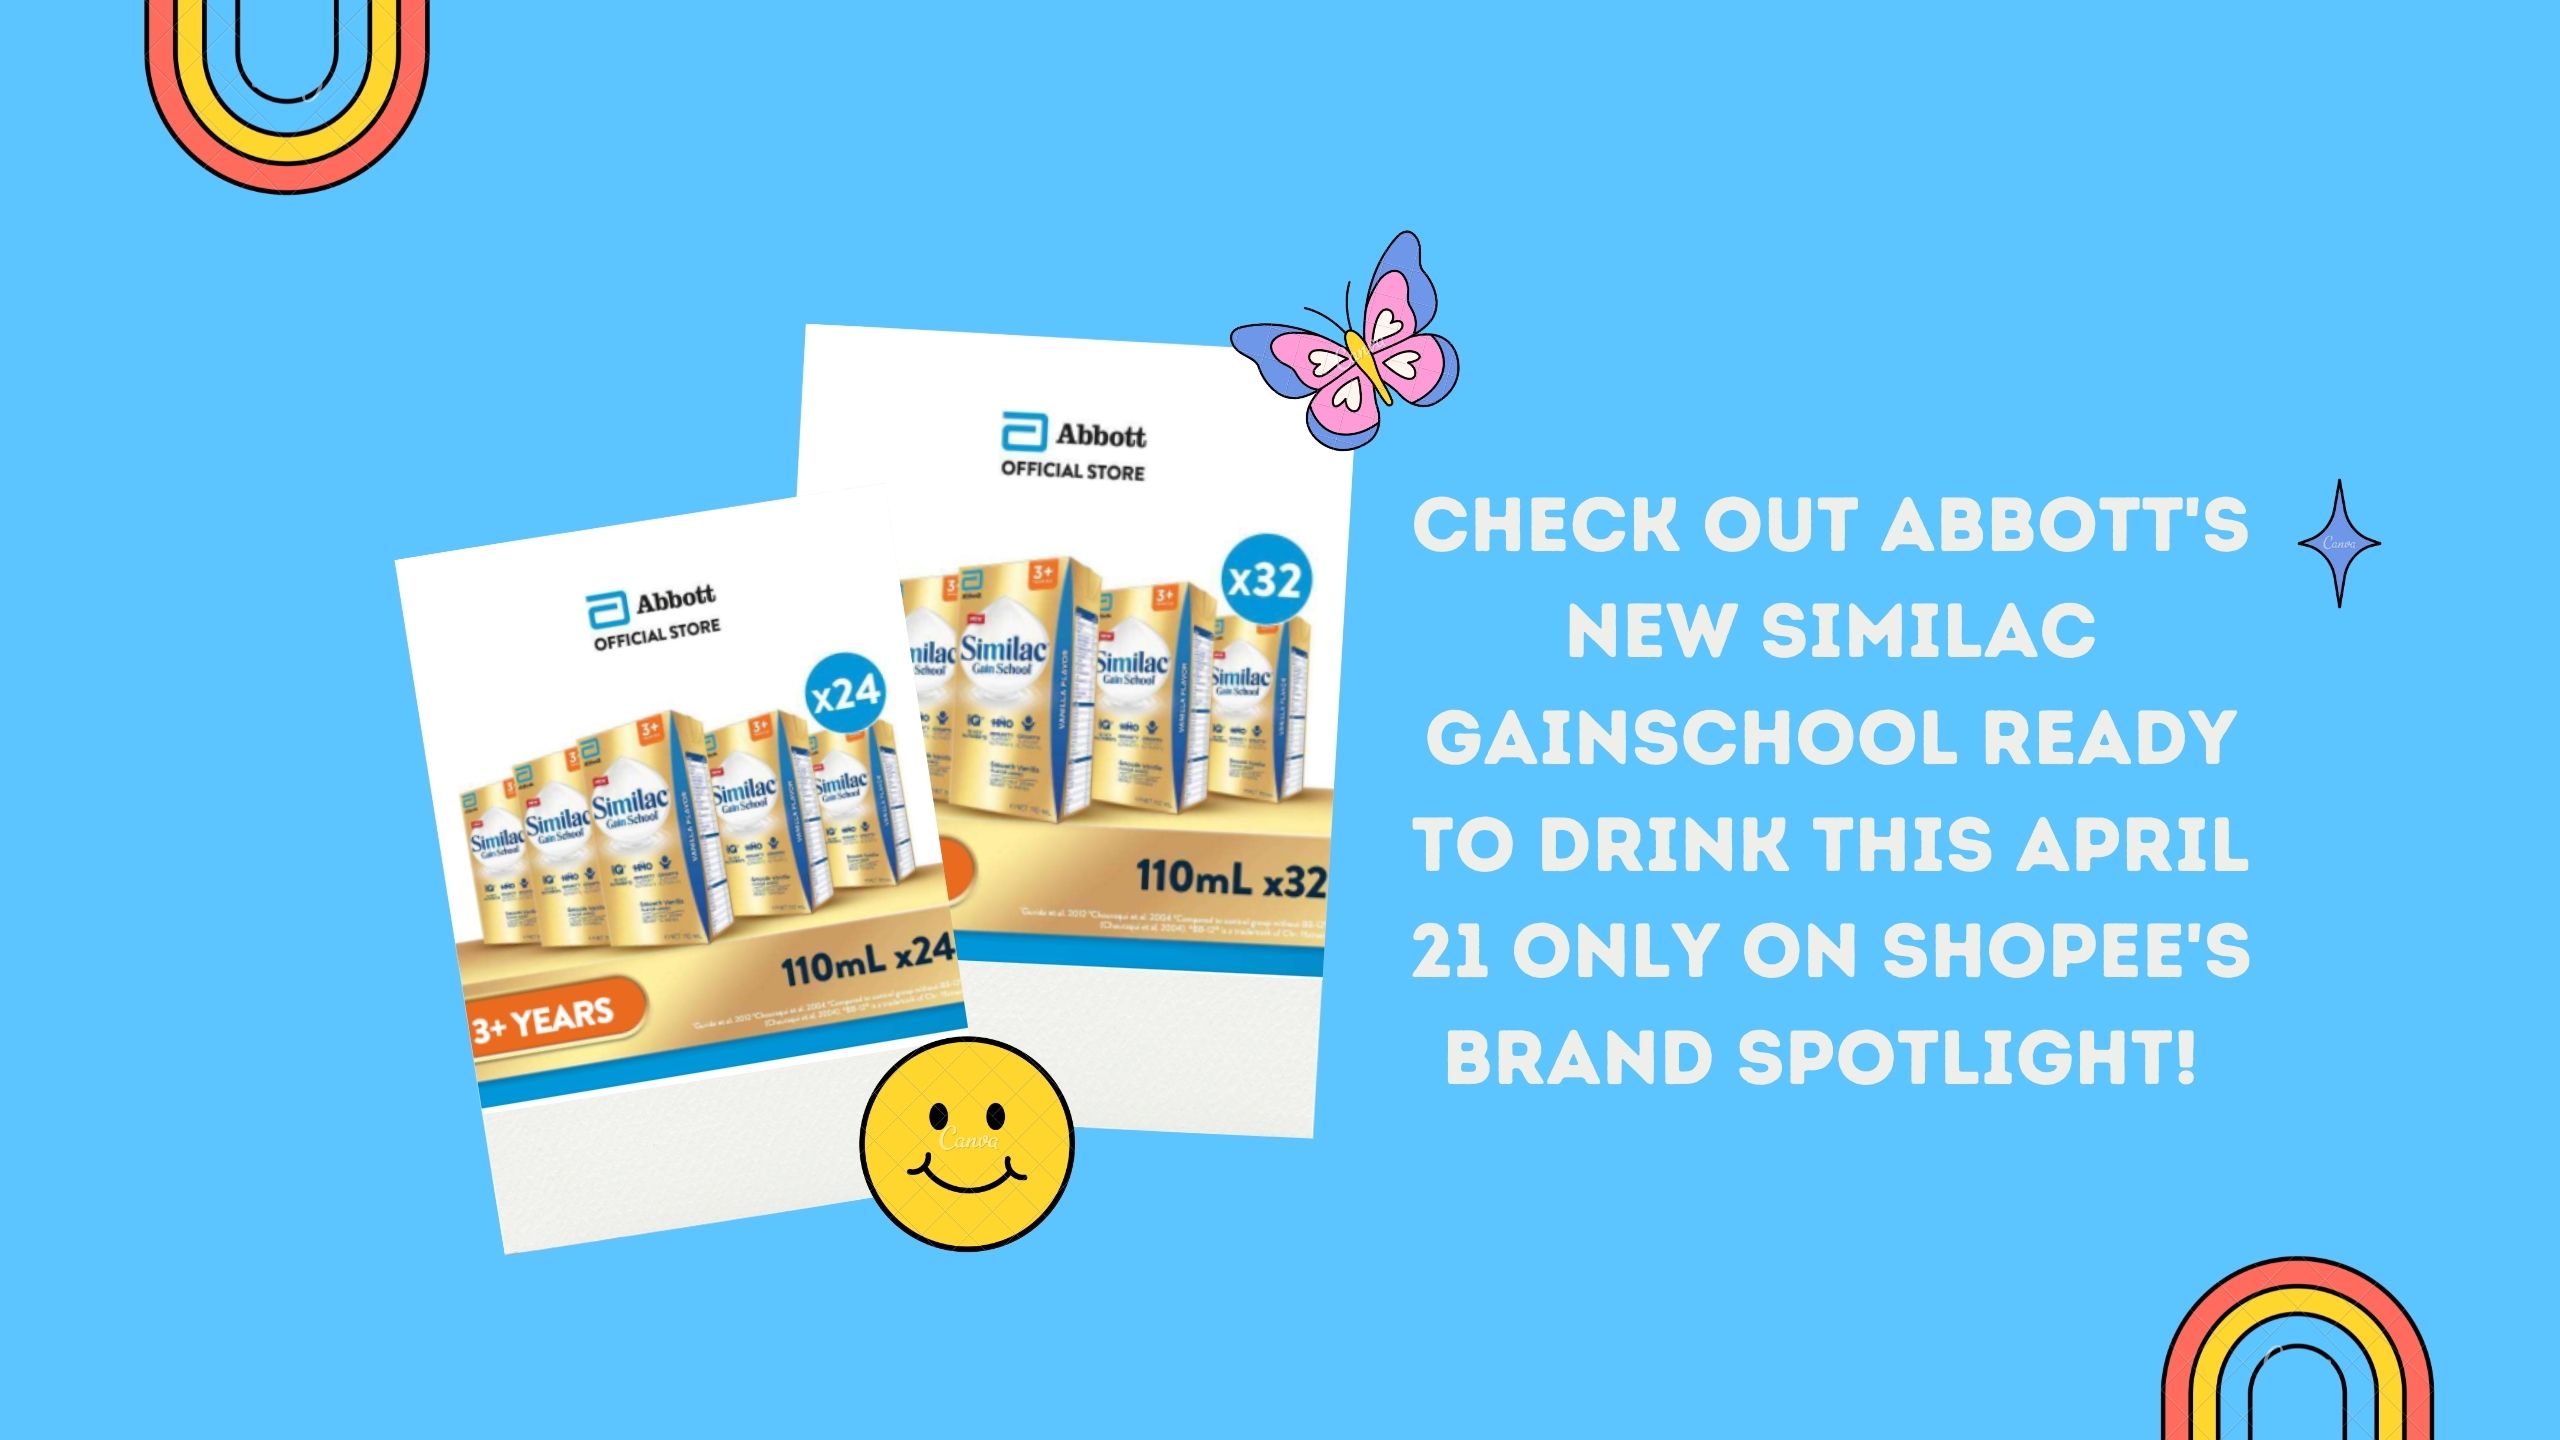 check-out-abbotts-new-similac-gainschool-ready-to-drink-this-april-21-only-on-shopees-brand-spotlight